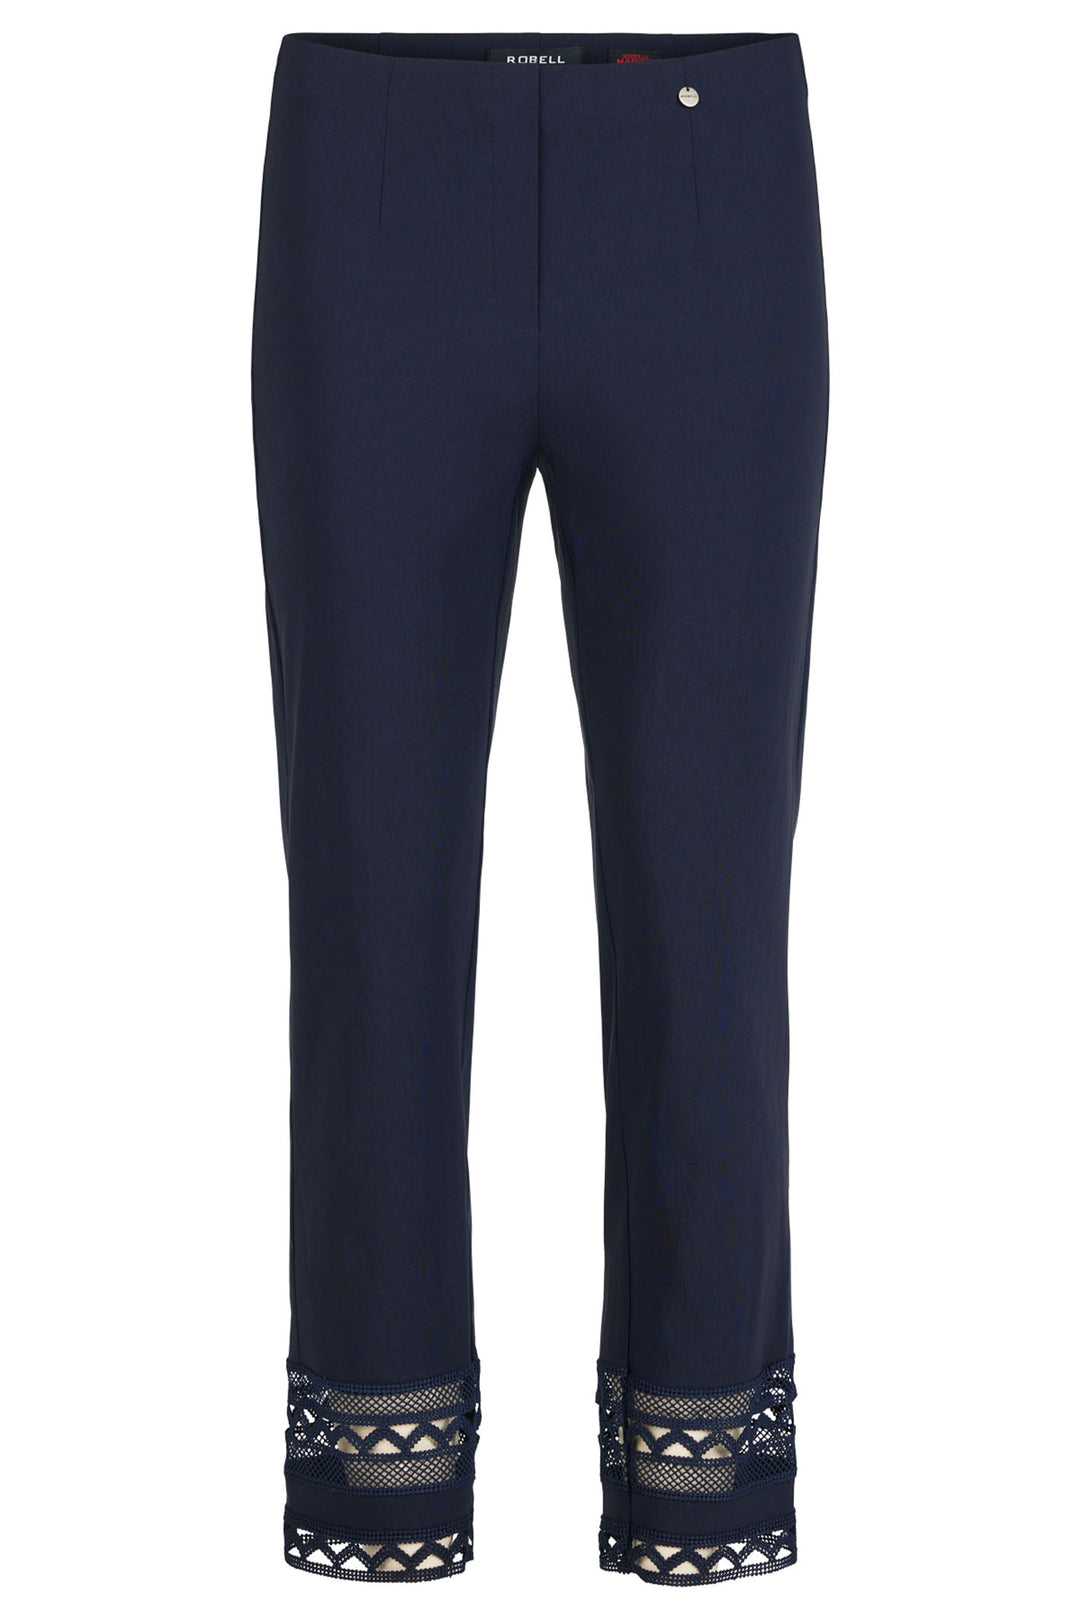 Robell Marie 09 53489 5499 69 Navy Ankle Detail Trousers 68cm - Dotique